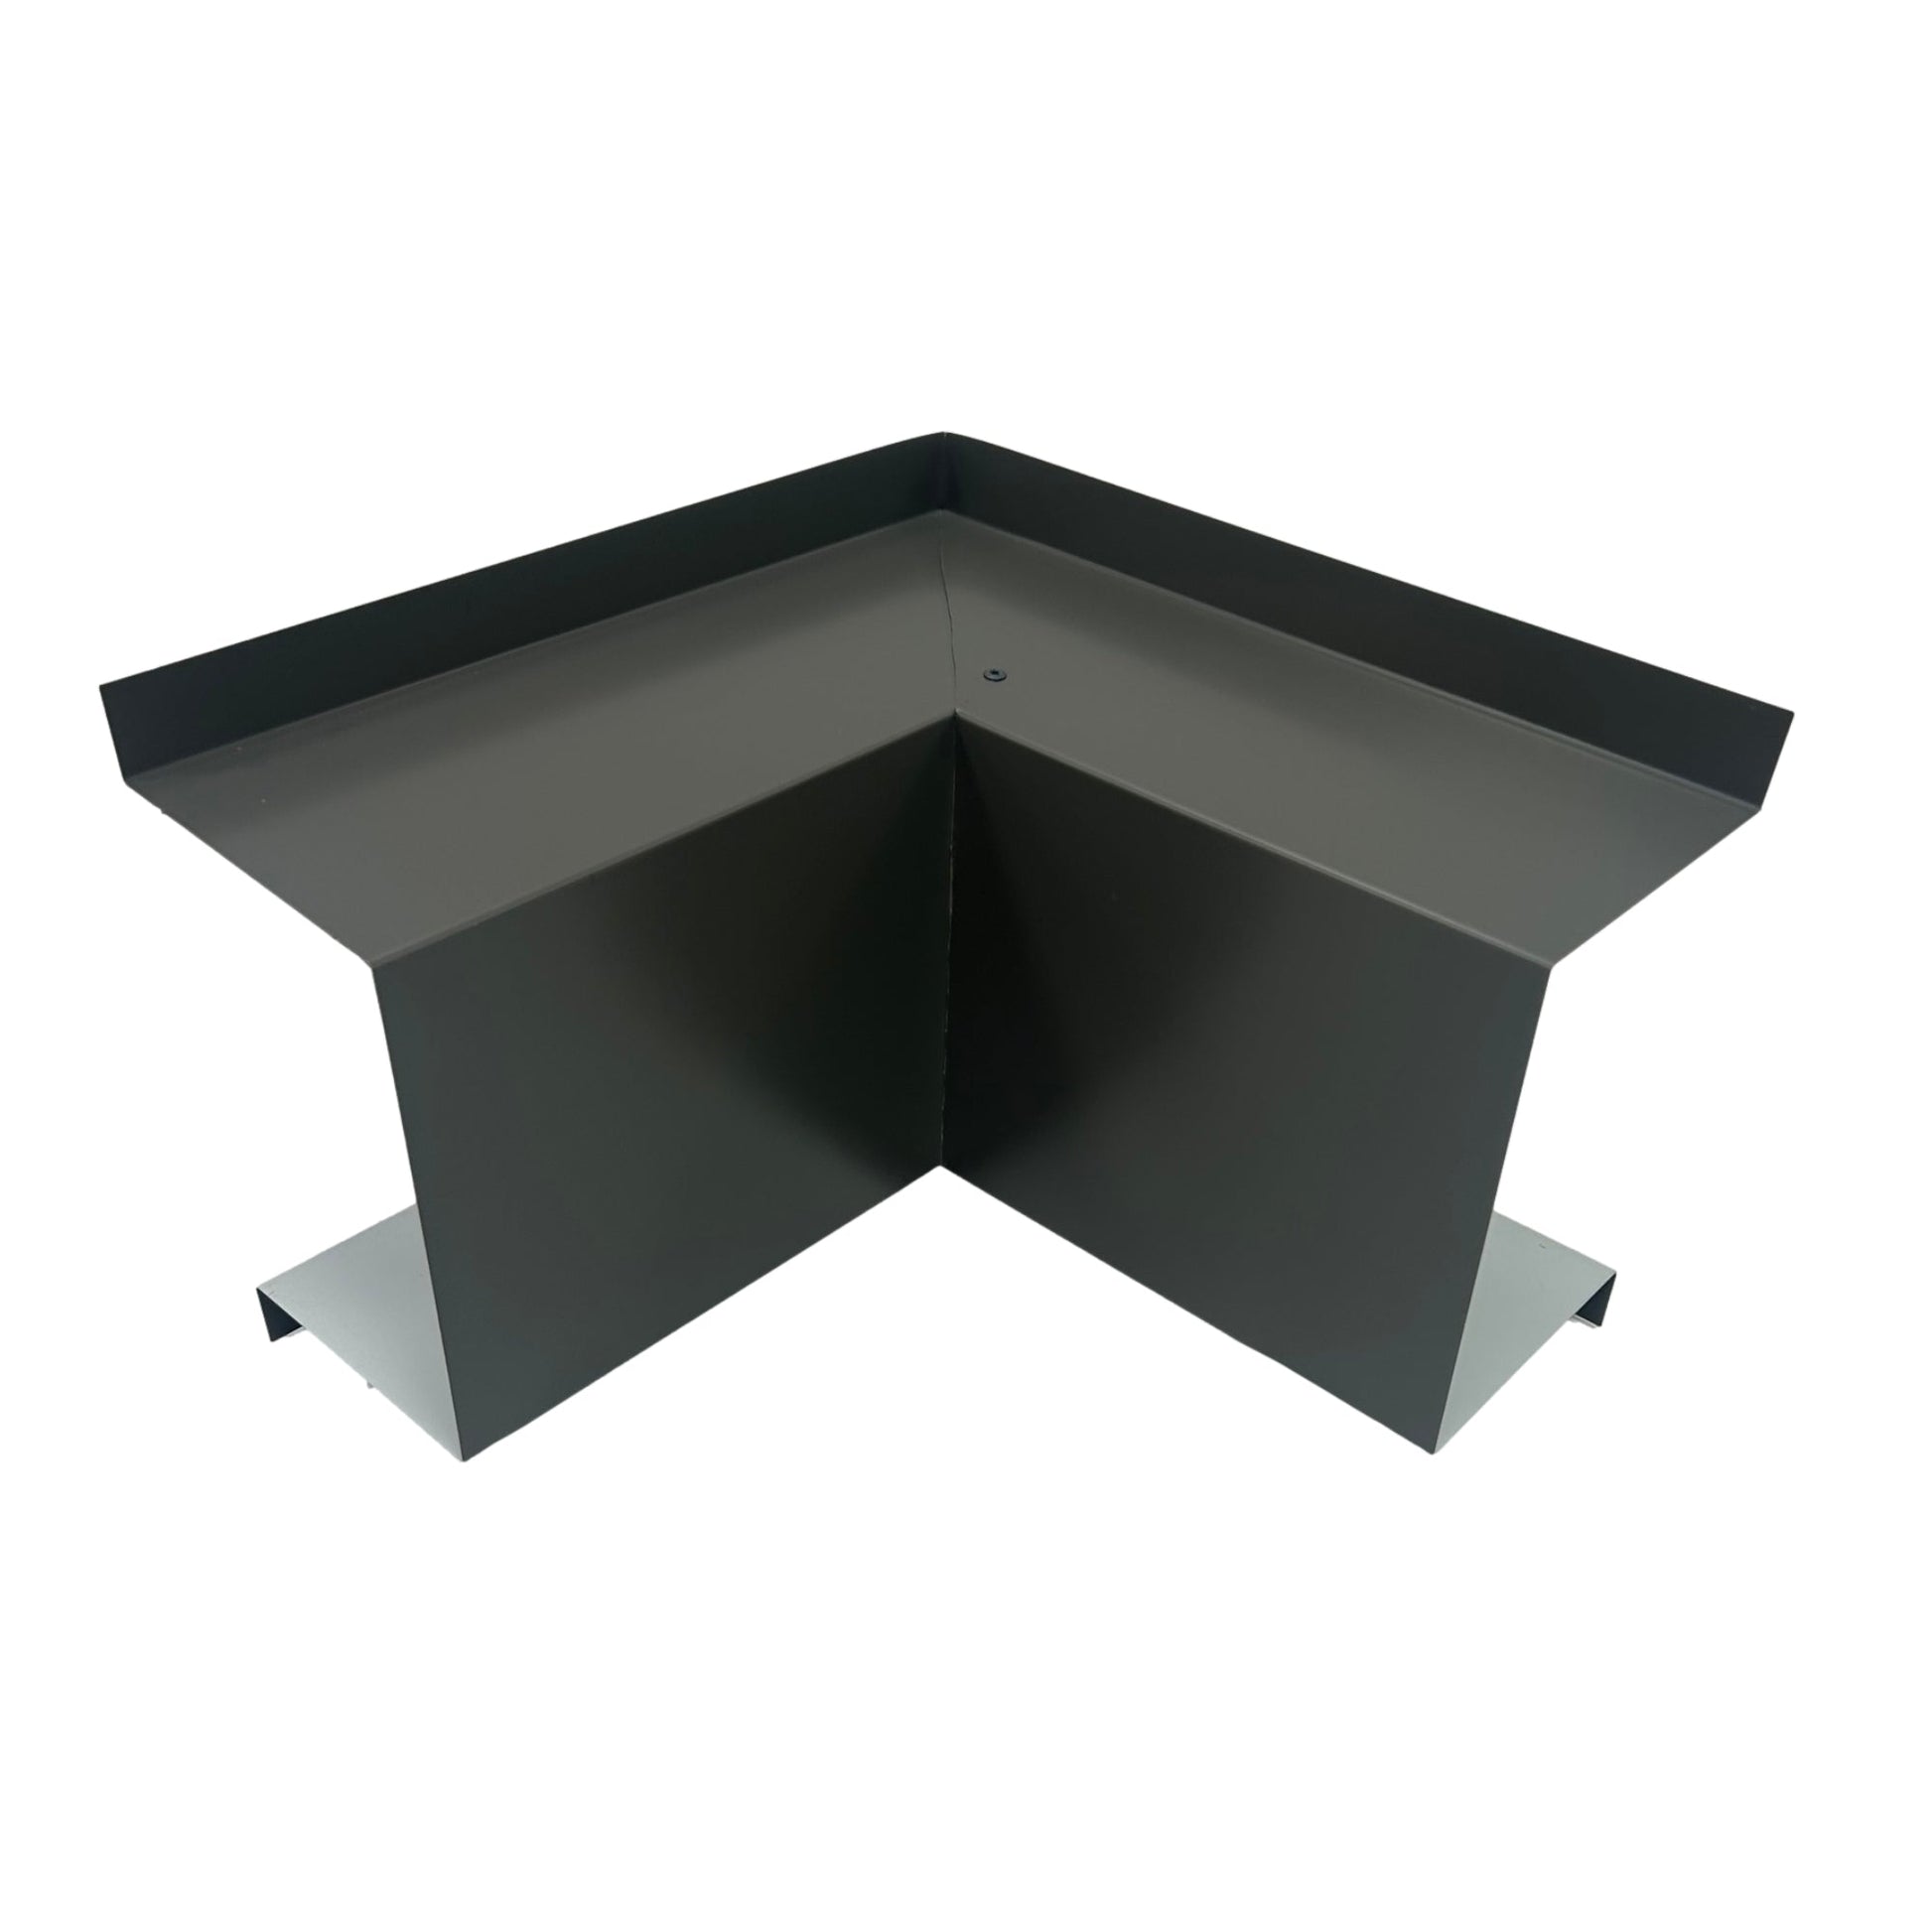 A folded black metal corner gutter piece with two flat sides forming a right angle, similar to Residential Series - Line Set Cover Inside Corner Elbows - Premium Quality from Perma Cover used in HVAC installations. There is a small screw with a washer at the intersection point of the two sides. The piece is designed for roofing or gutter systems to manage rainwater flow.